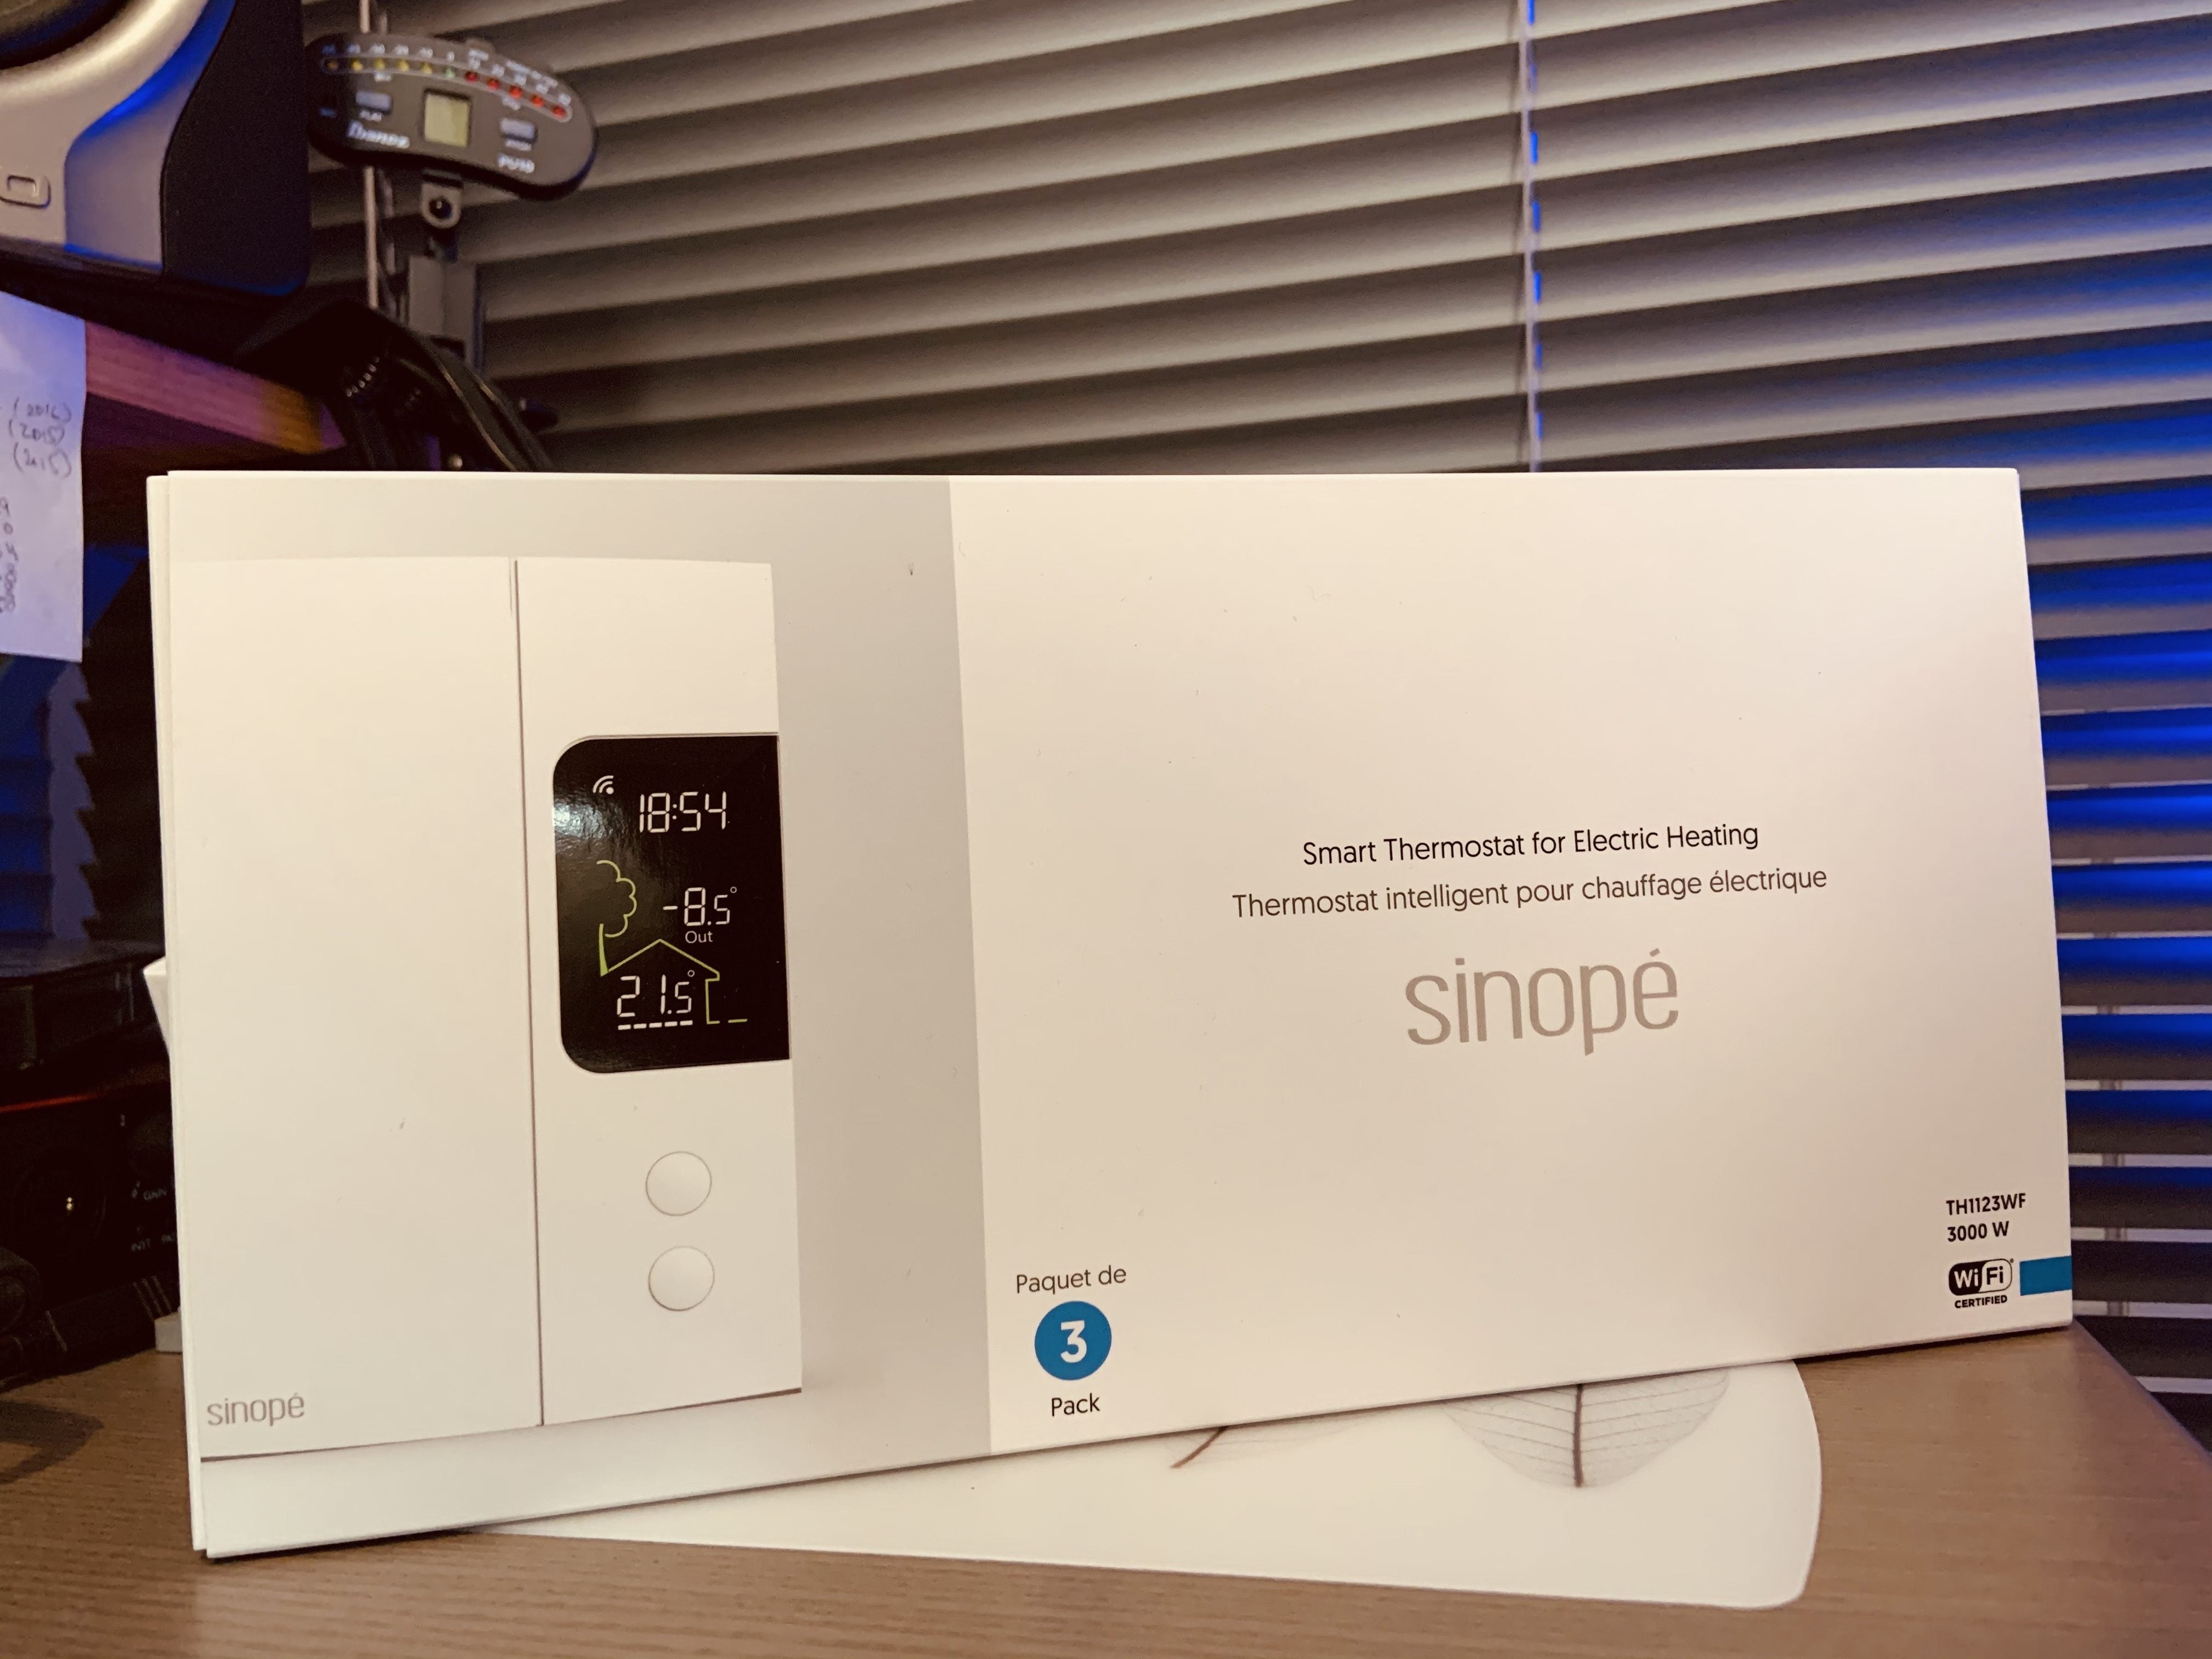 costco-bc-only-electric-hot-sinope-3-pack-smart-wifi-thermostat